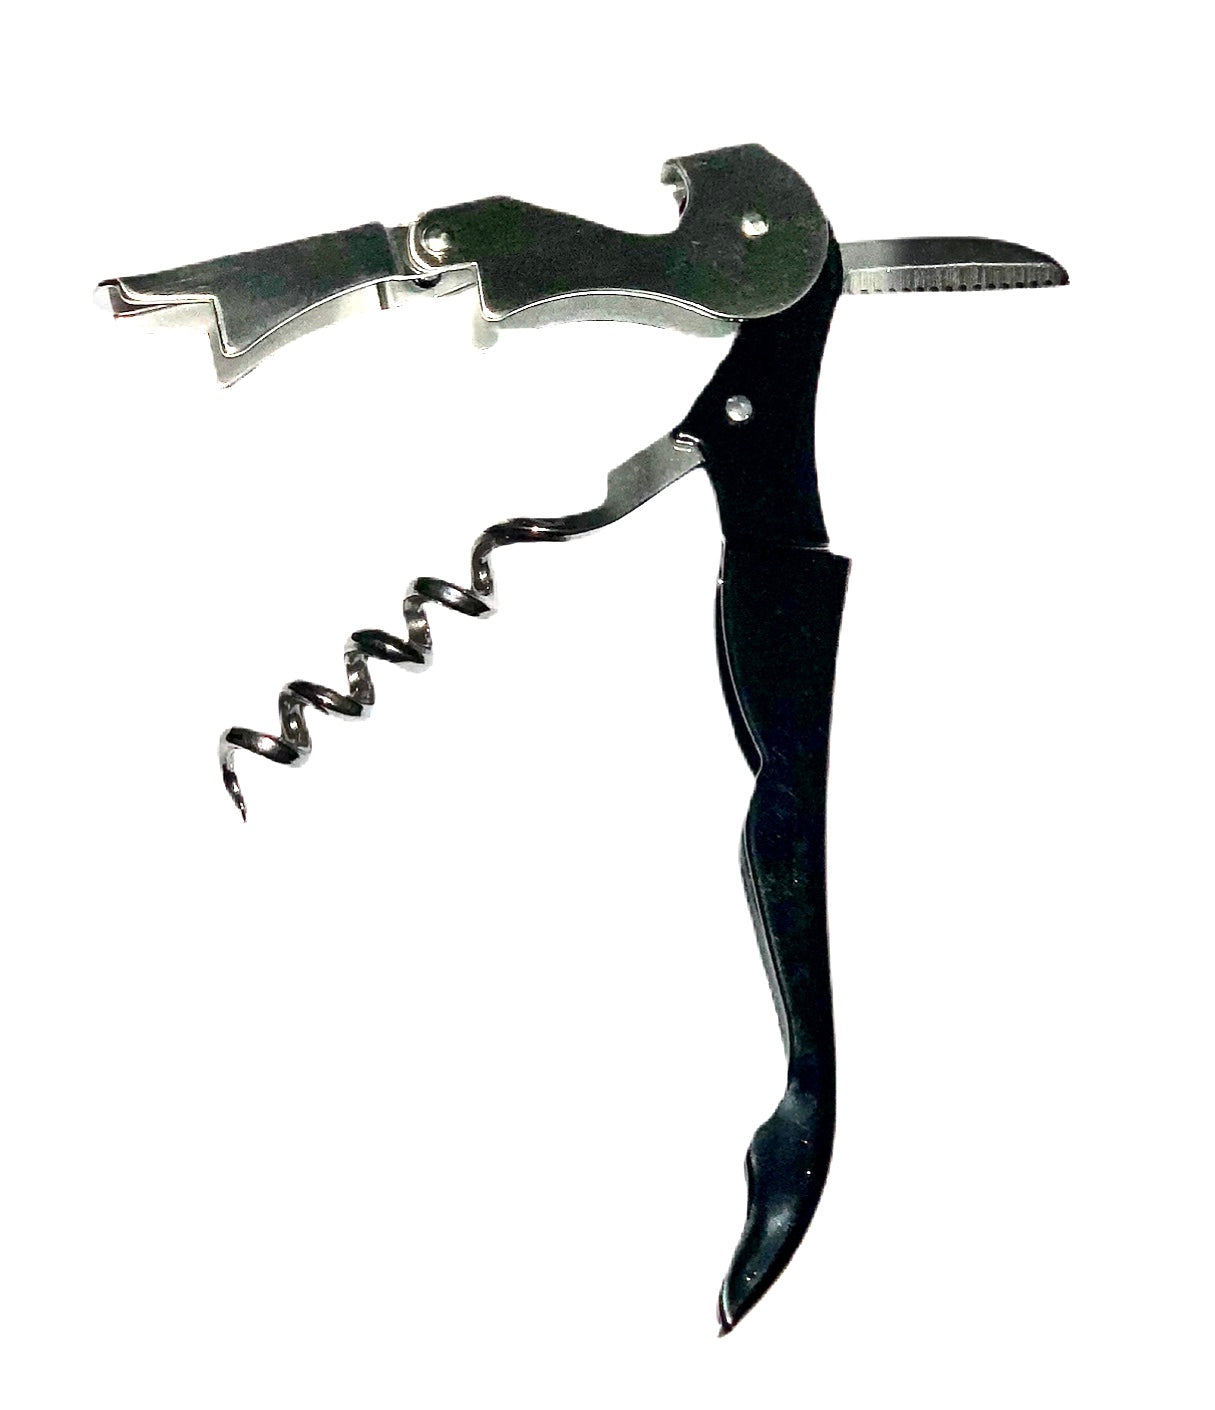 Waiter's Stainless Steel Corkscrew. Heavy Duty, Double-hinged Multi-tool and Portable. Easy to use! Black. Notice multi-tool function.